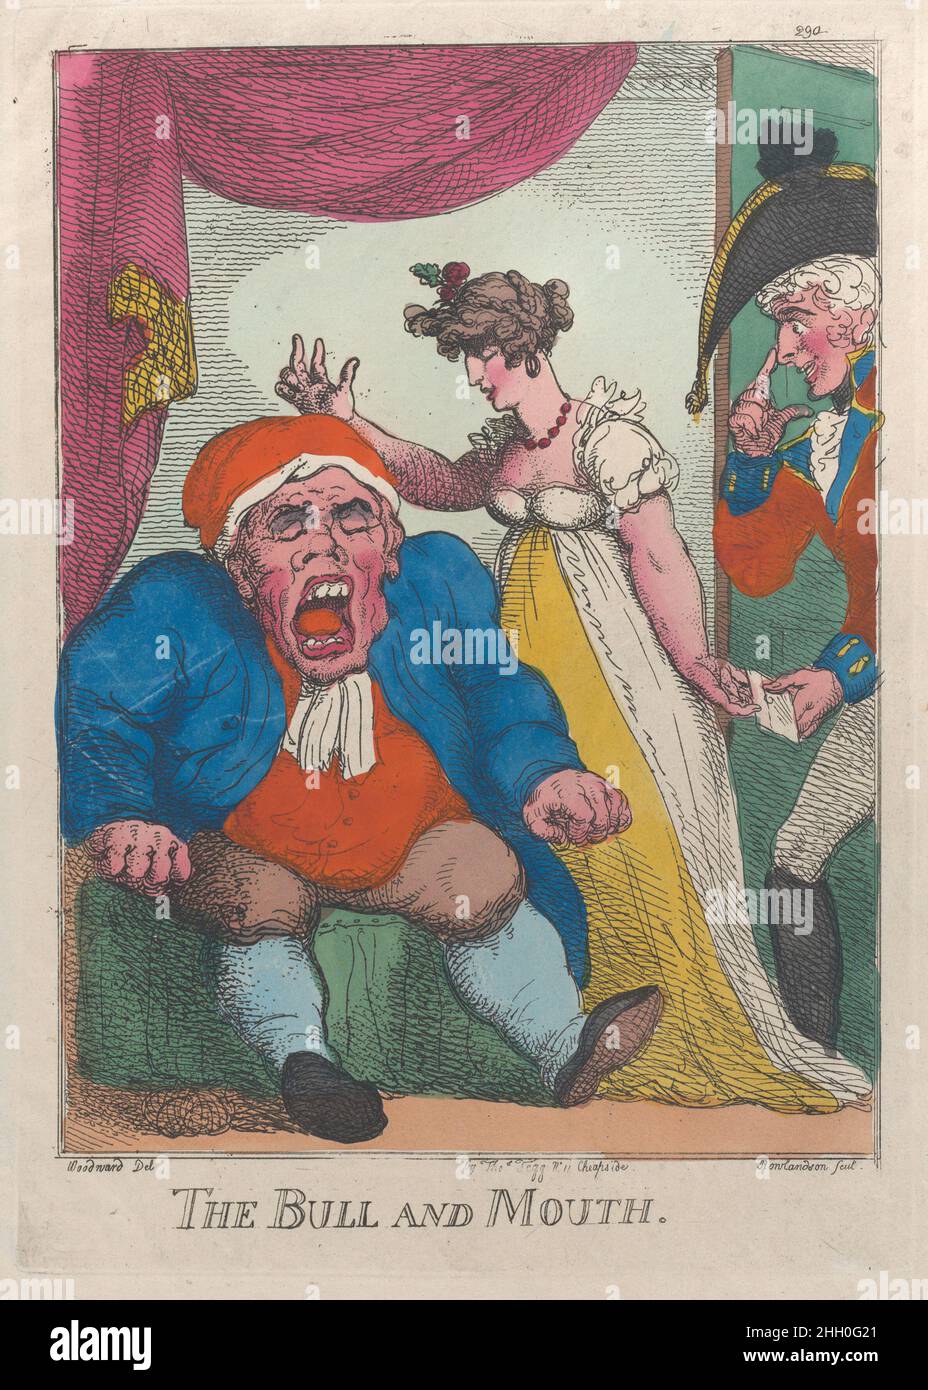 The Bull and Mouth 1808–09 Thomas Rowlandson At left there is an elderly overweight man sitting an an armchair. His wife stands behind him and motions to signify horns above his head, while she slips a letter into the hand of a handsome military officer standing in the doorway at right.. The Bull and Mouth. Thomas Rowlandson (British, London 1757–1827 London). 1808–09. Hand-colored etching; reprint. Thomas Tegg (British, 1776–1846). Prints Stock Photo